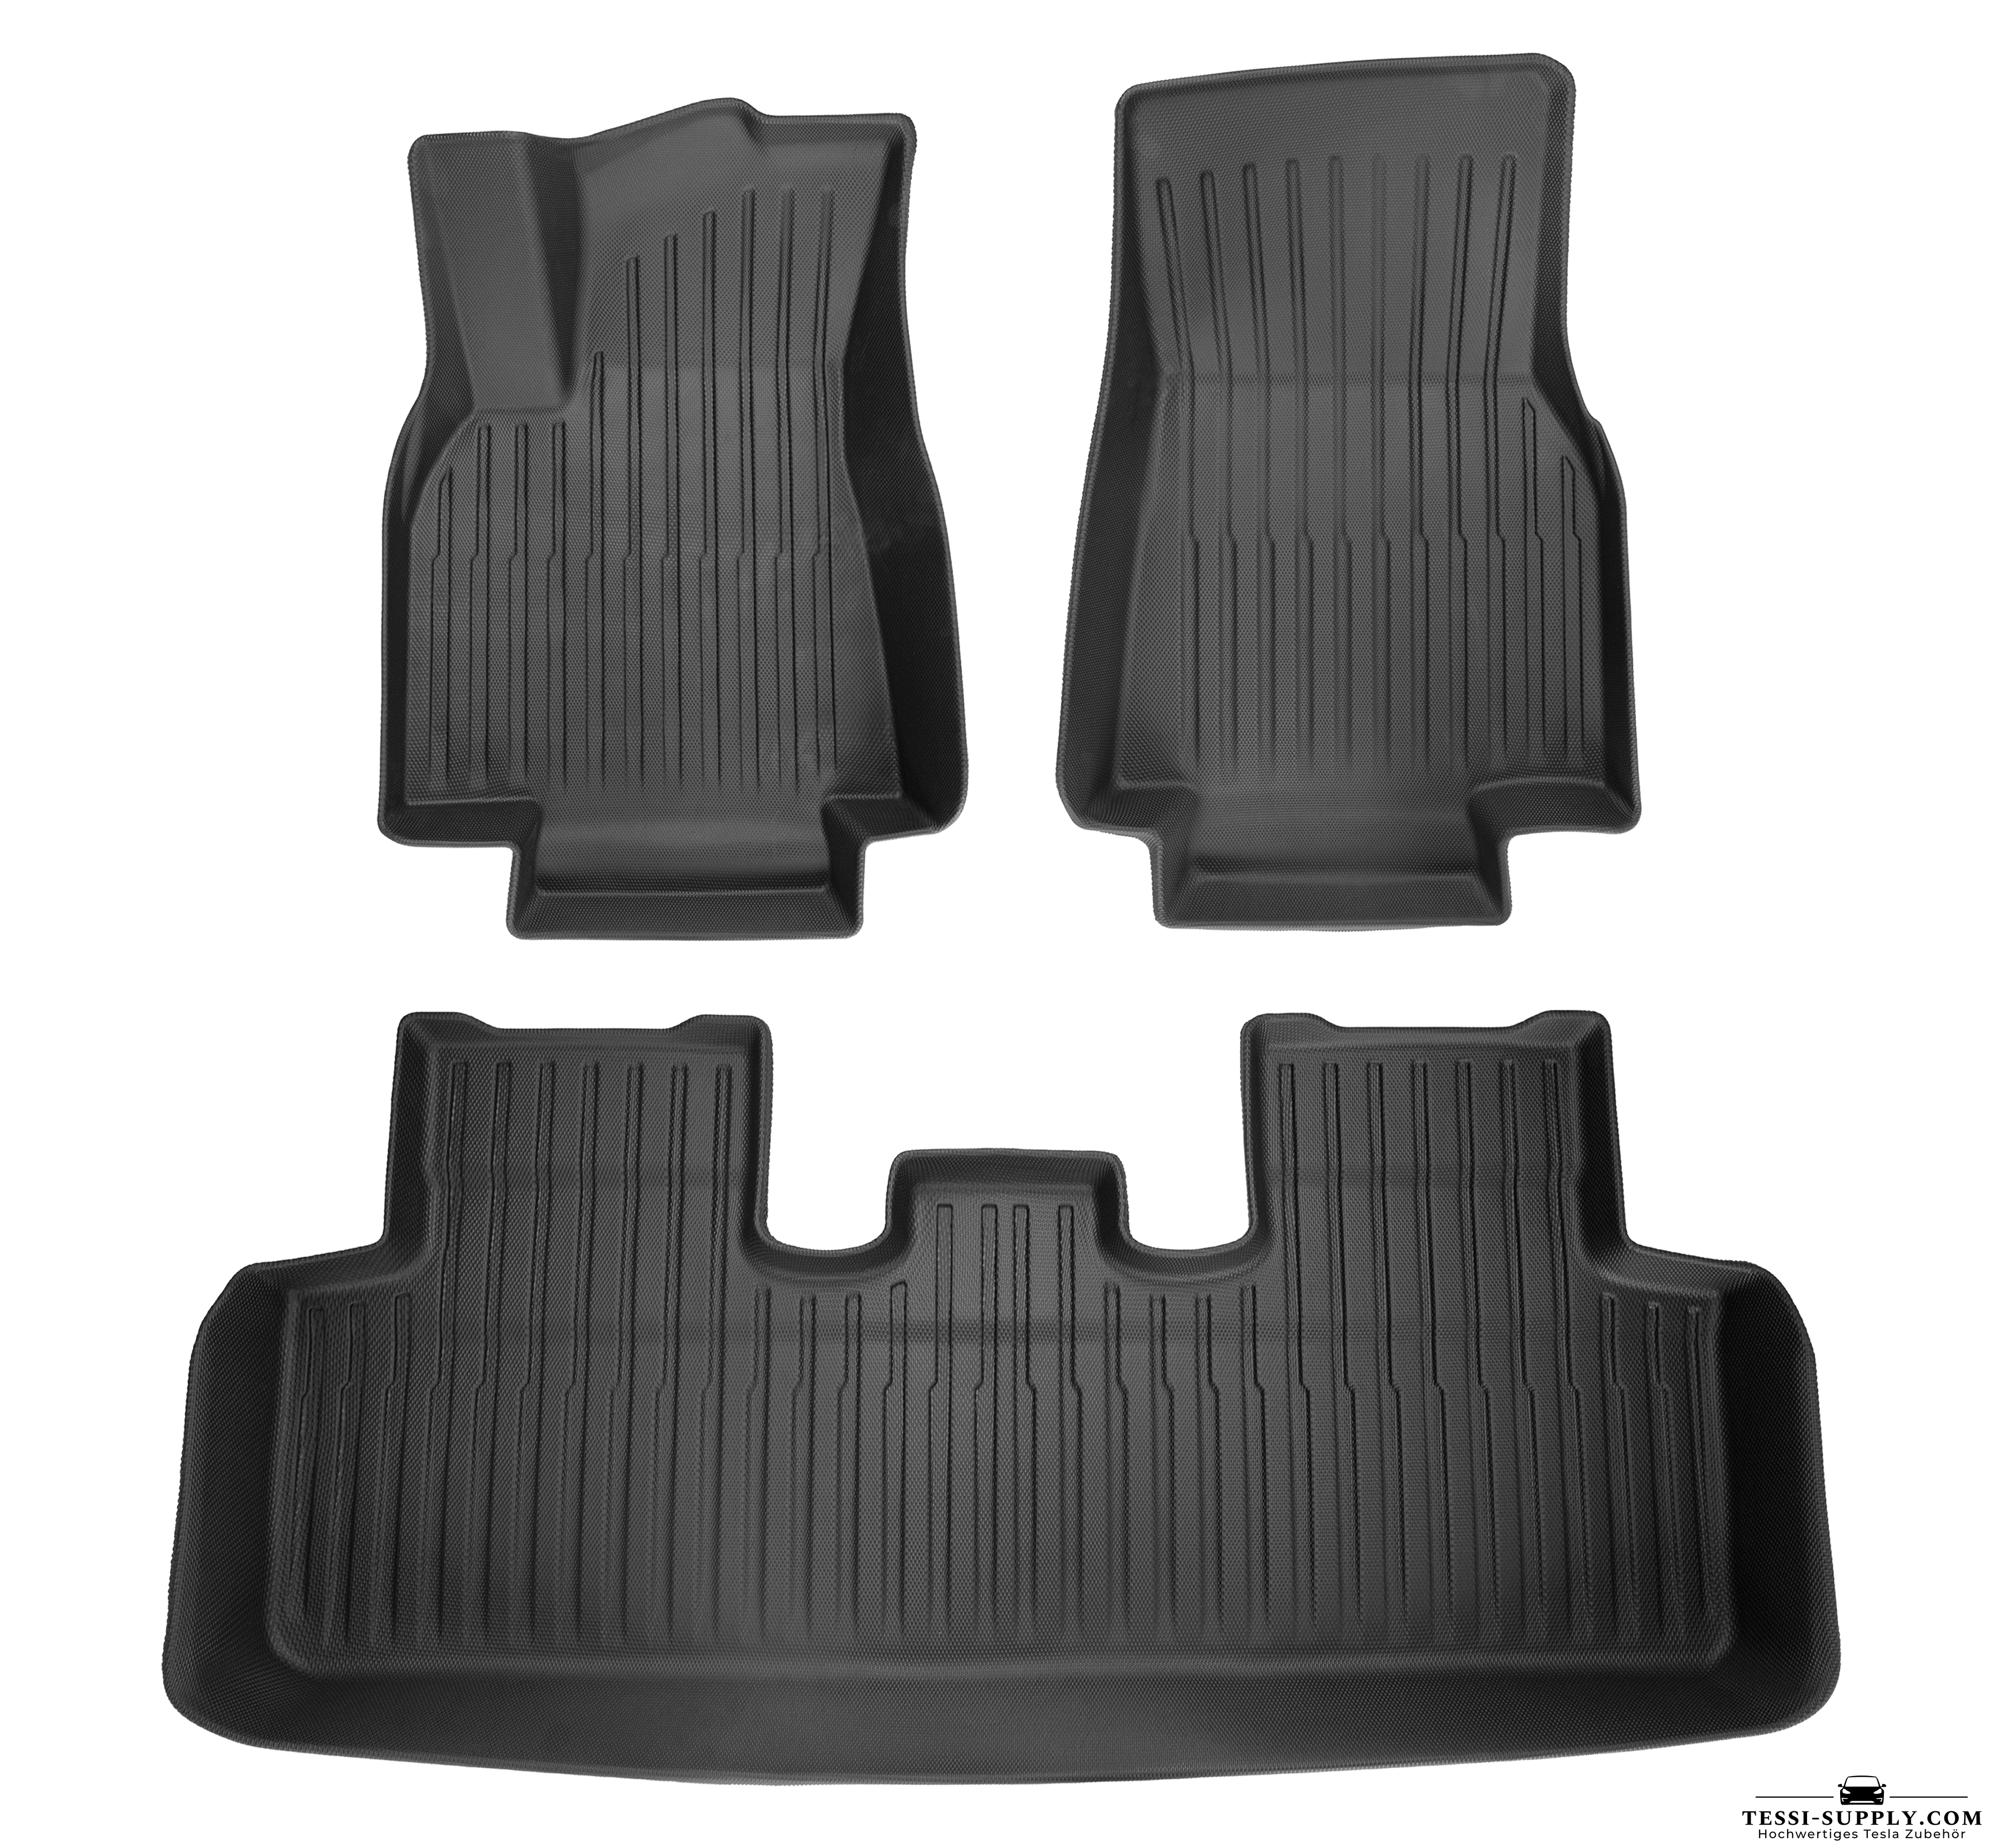 Model Y trunk mat with protection for seats